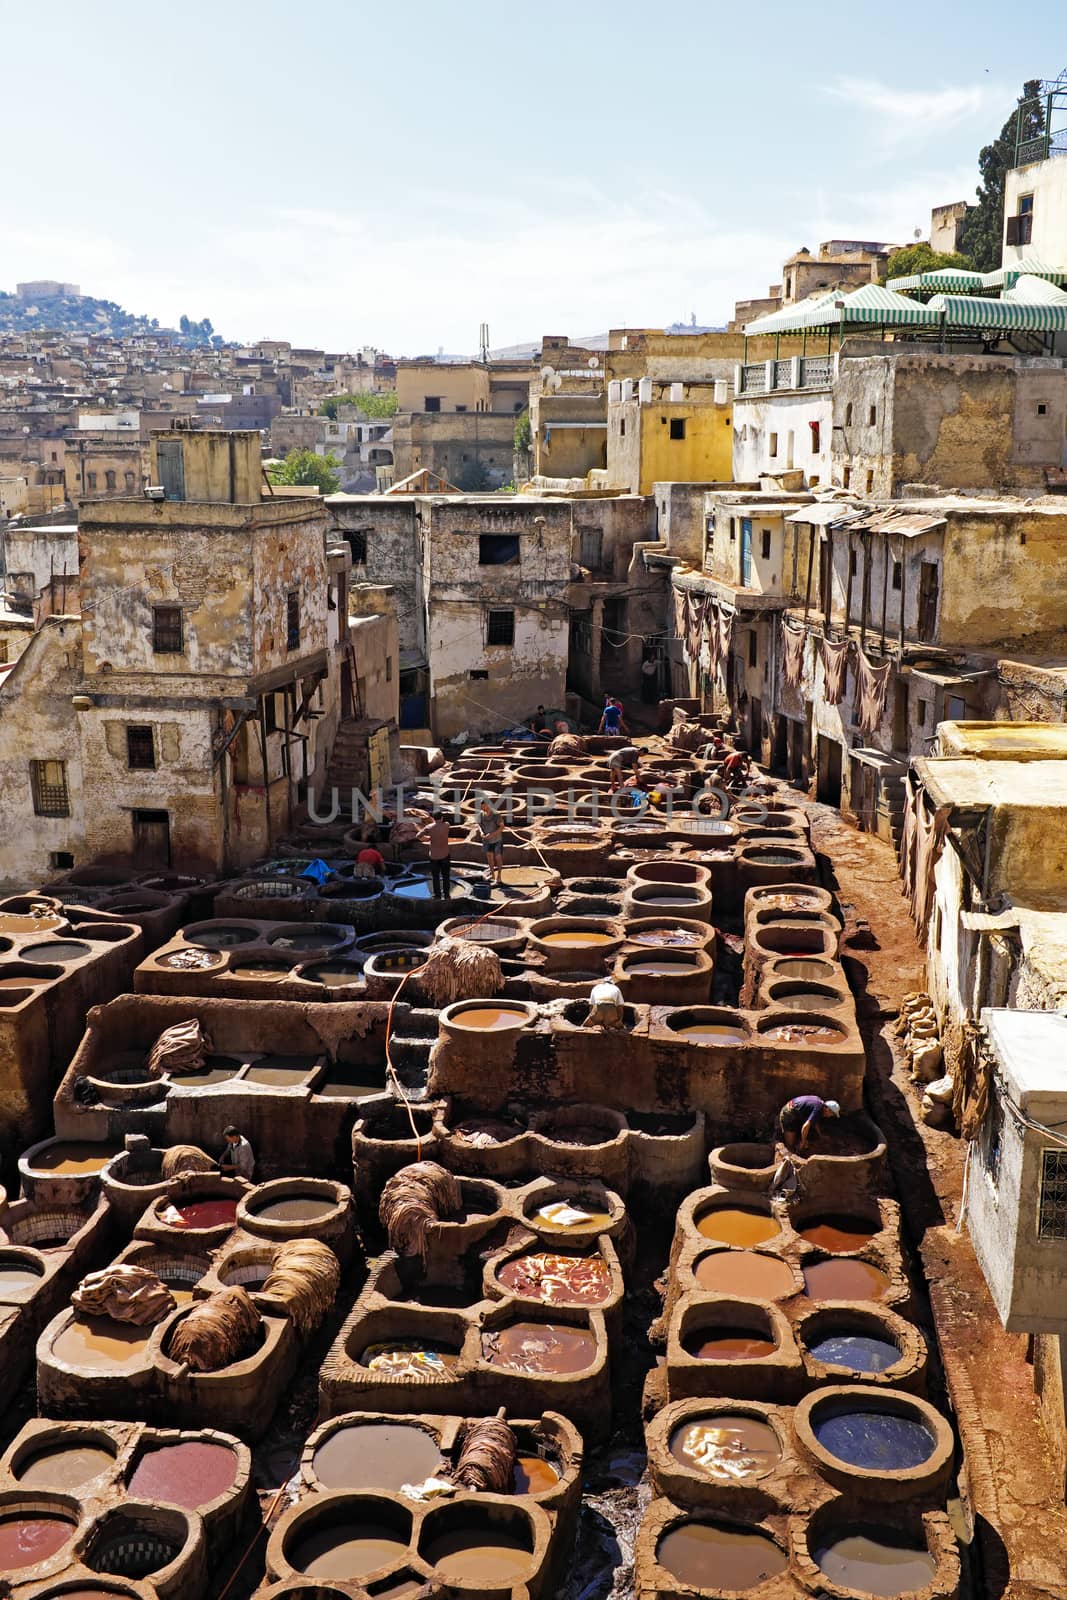 Tanners working leather in the old tannery of Fes, Morocco